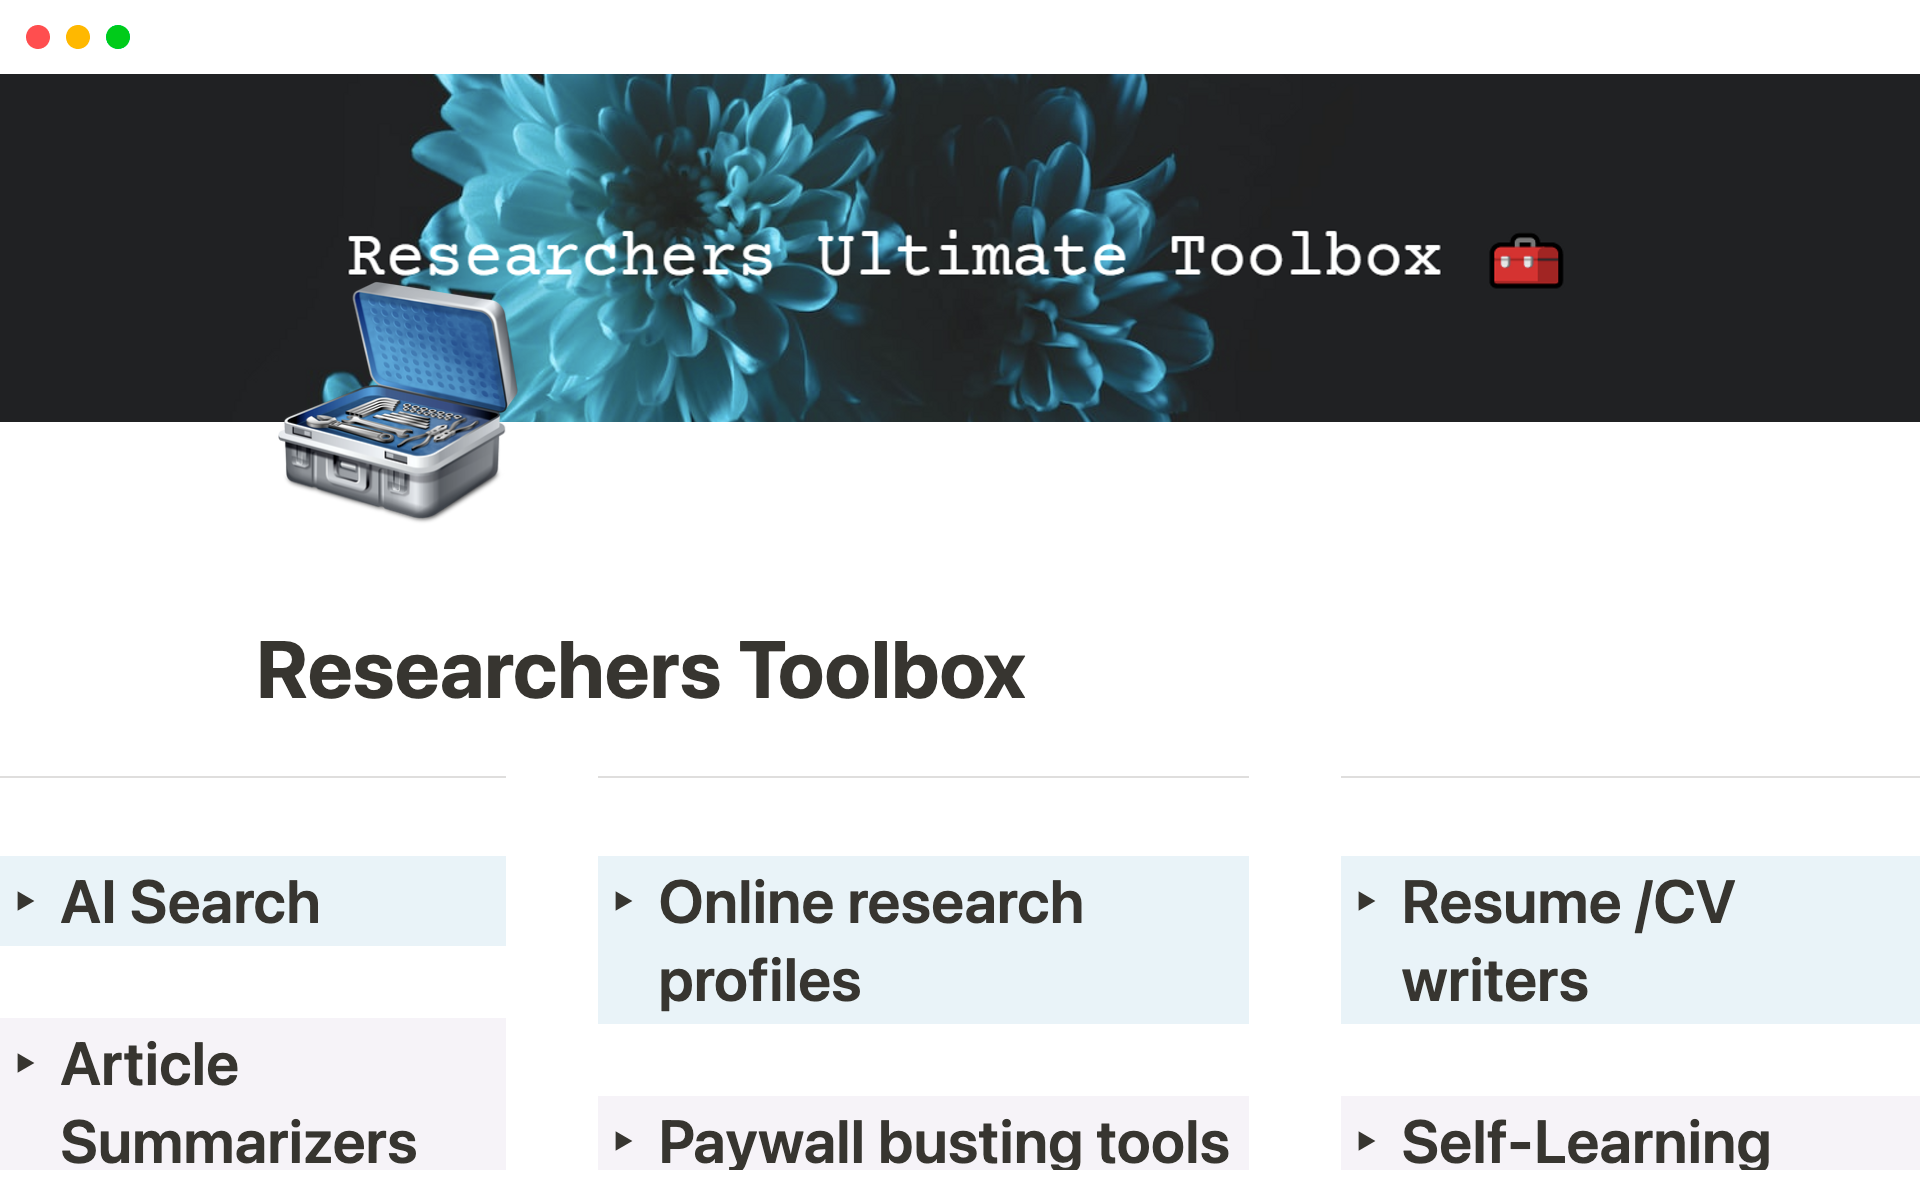 Researcher's Toolbox is meticulously designed to simplify your research process, allowing you to discover the best tools and resources tailored to your needs.